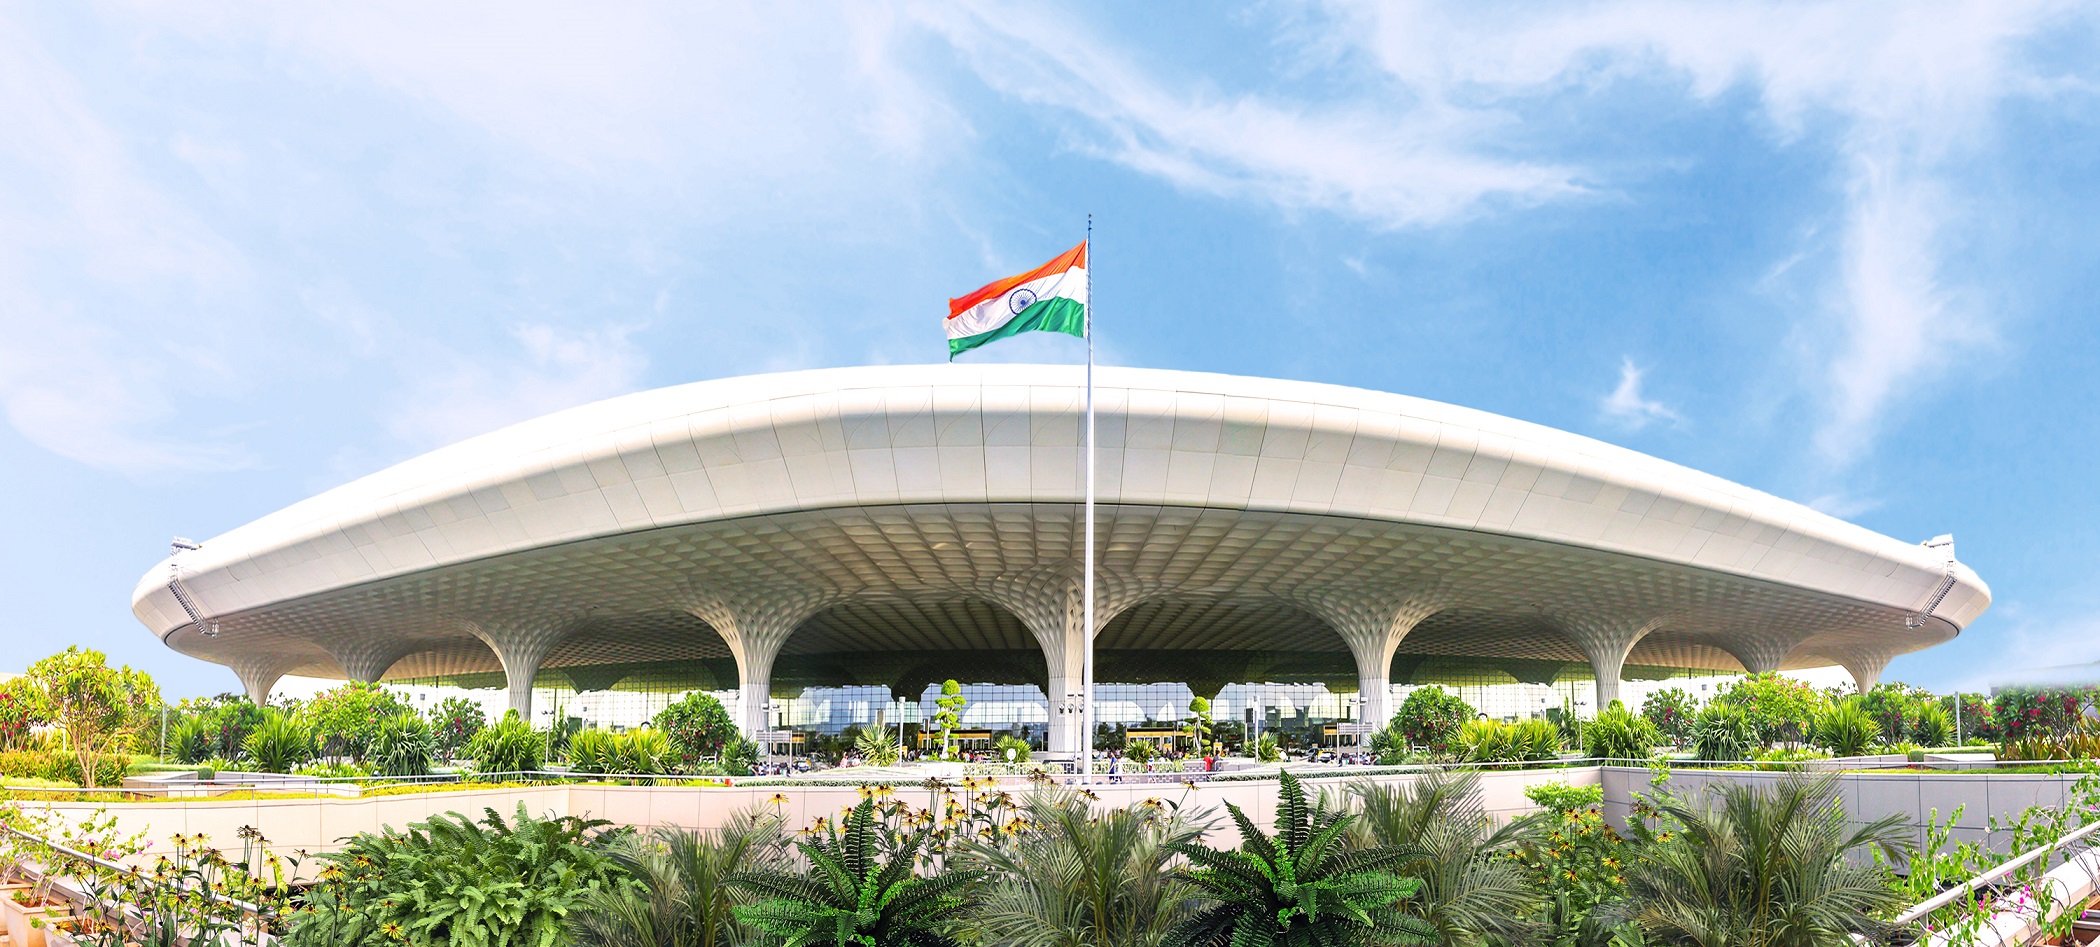 CSMIA, the only Indian airport to be recognised on the Travel + Leisure’s Readers' 10 Favorite International Airports of 2023